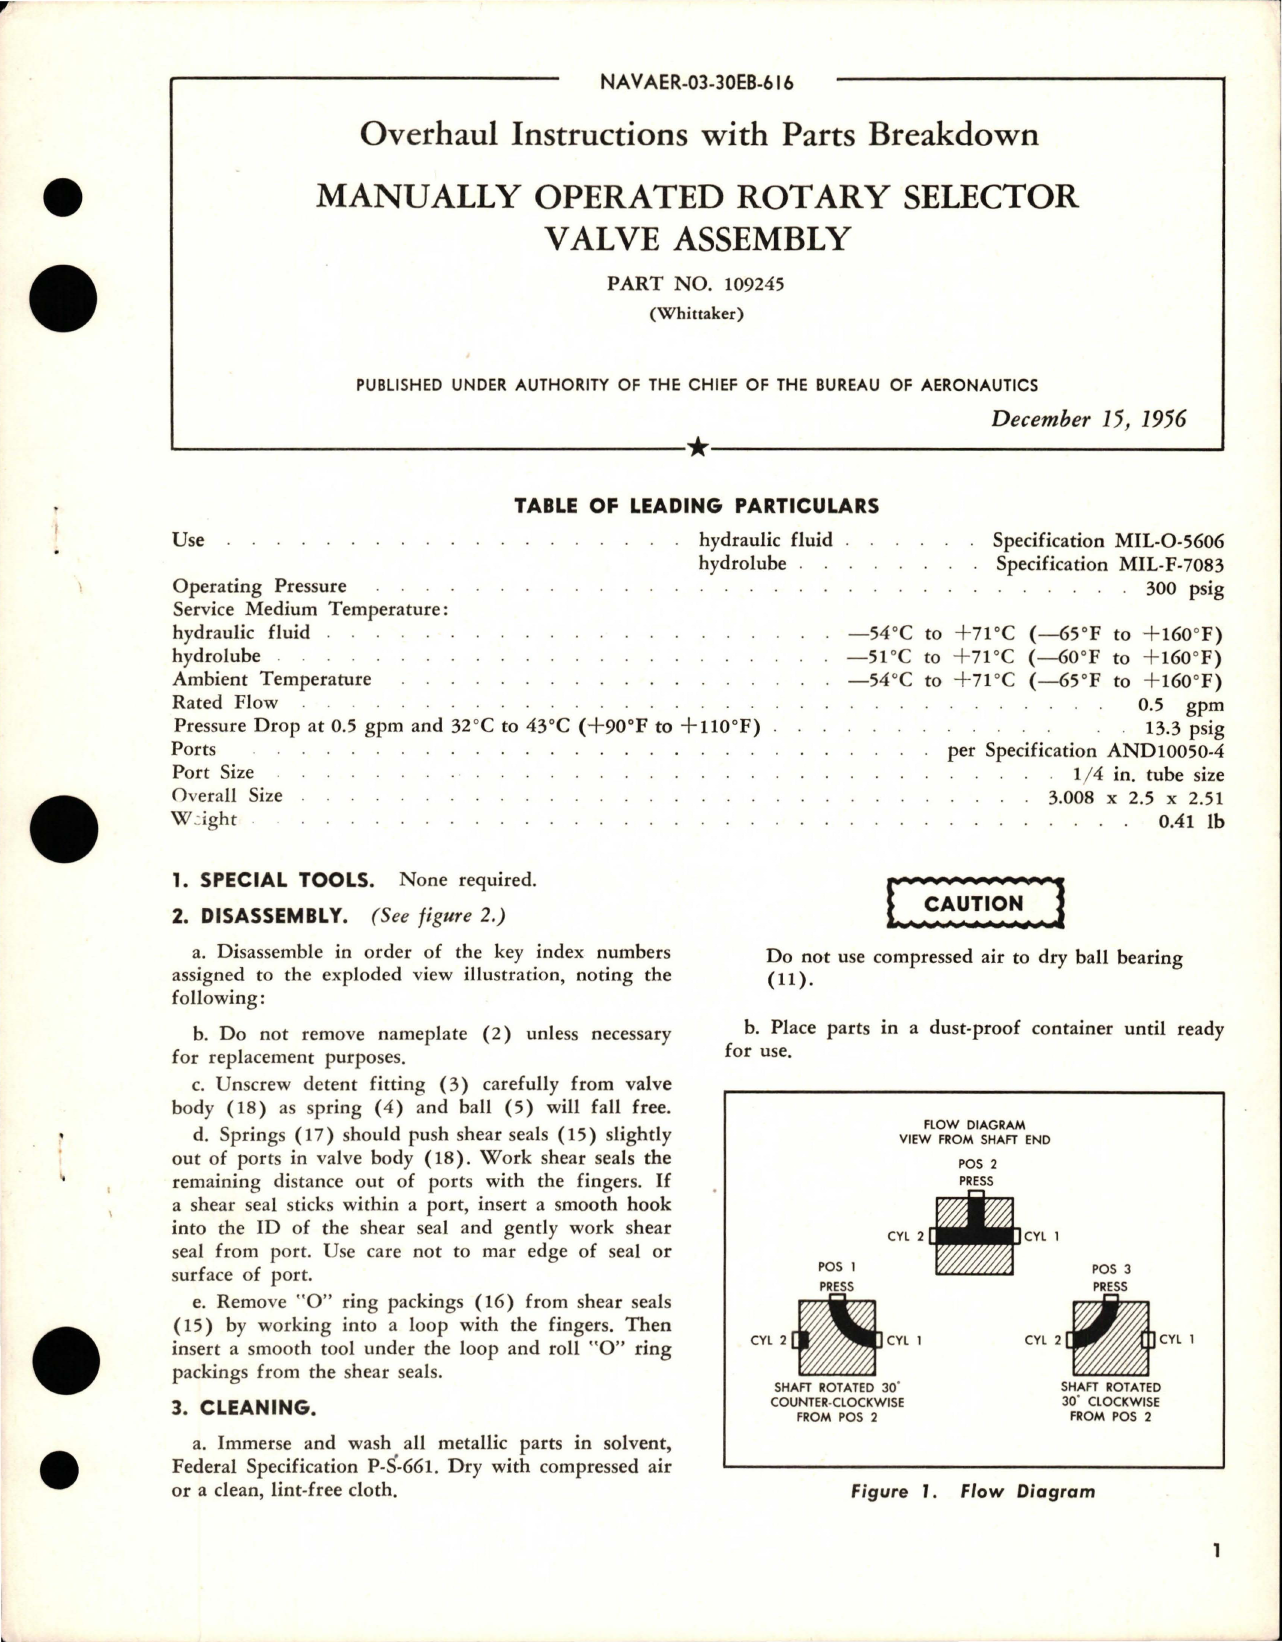 Sample page 1 from AirCorps Library document: Overhaul Instructions with Parts Breakdown for Manually Operated Rotary Selector Valve Assembly - Part 109245